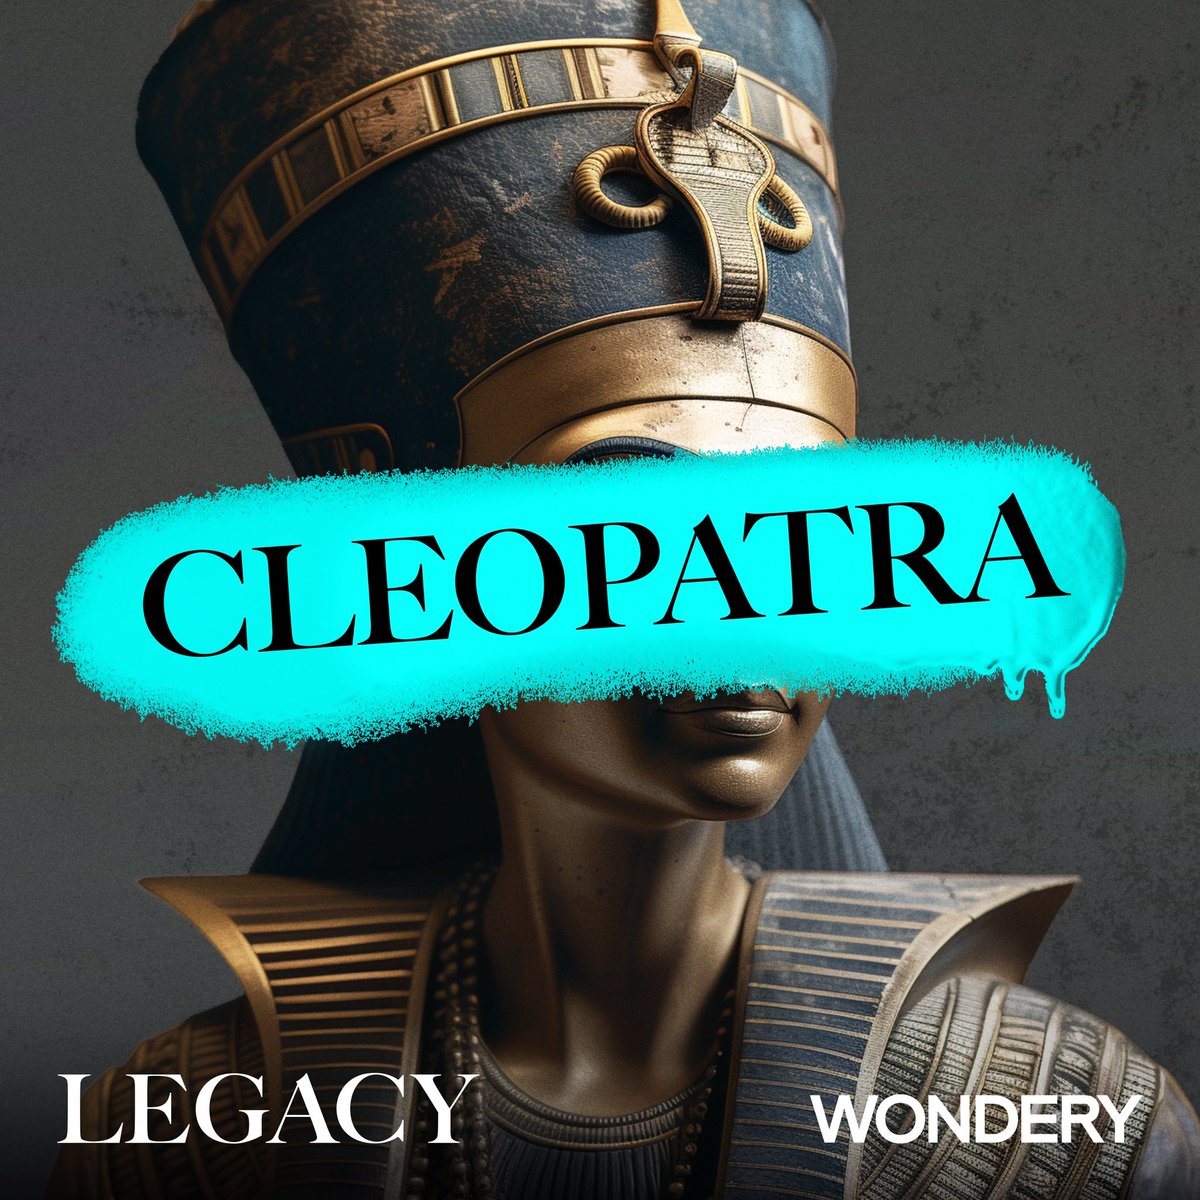 The real story? The real legacy? Me @peterfrankopan break it down! Listen now, @WonderyMedia and wherever you get your podcasts #Cleopatra #history #legacy #podcast